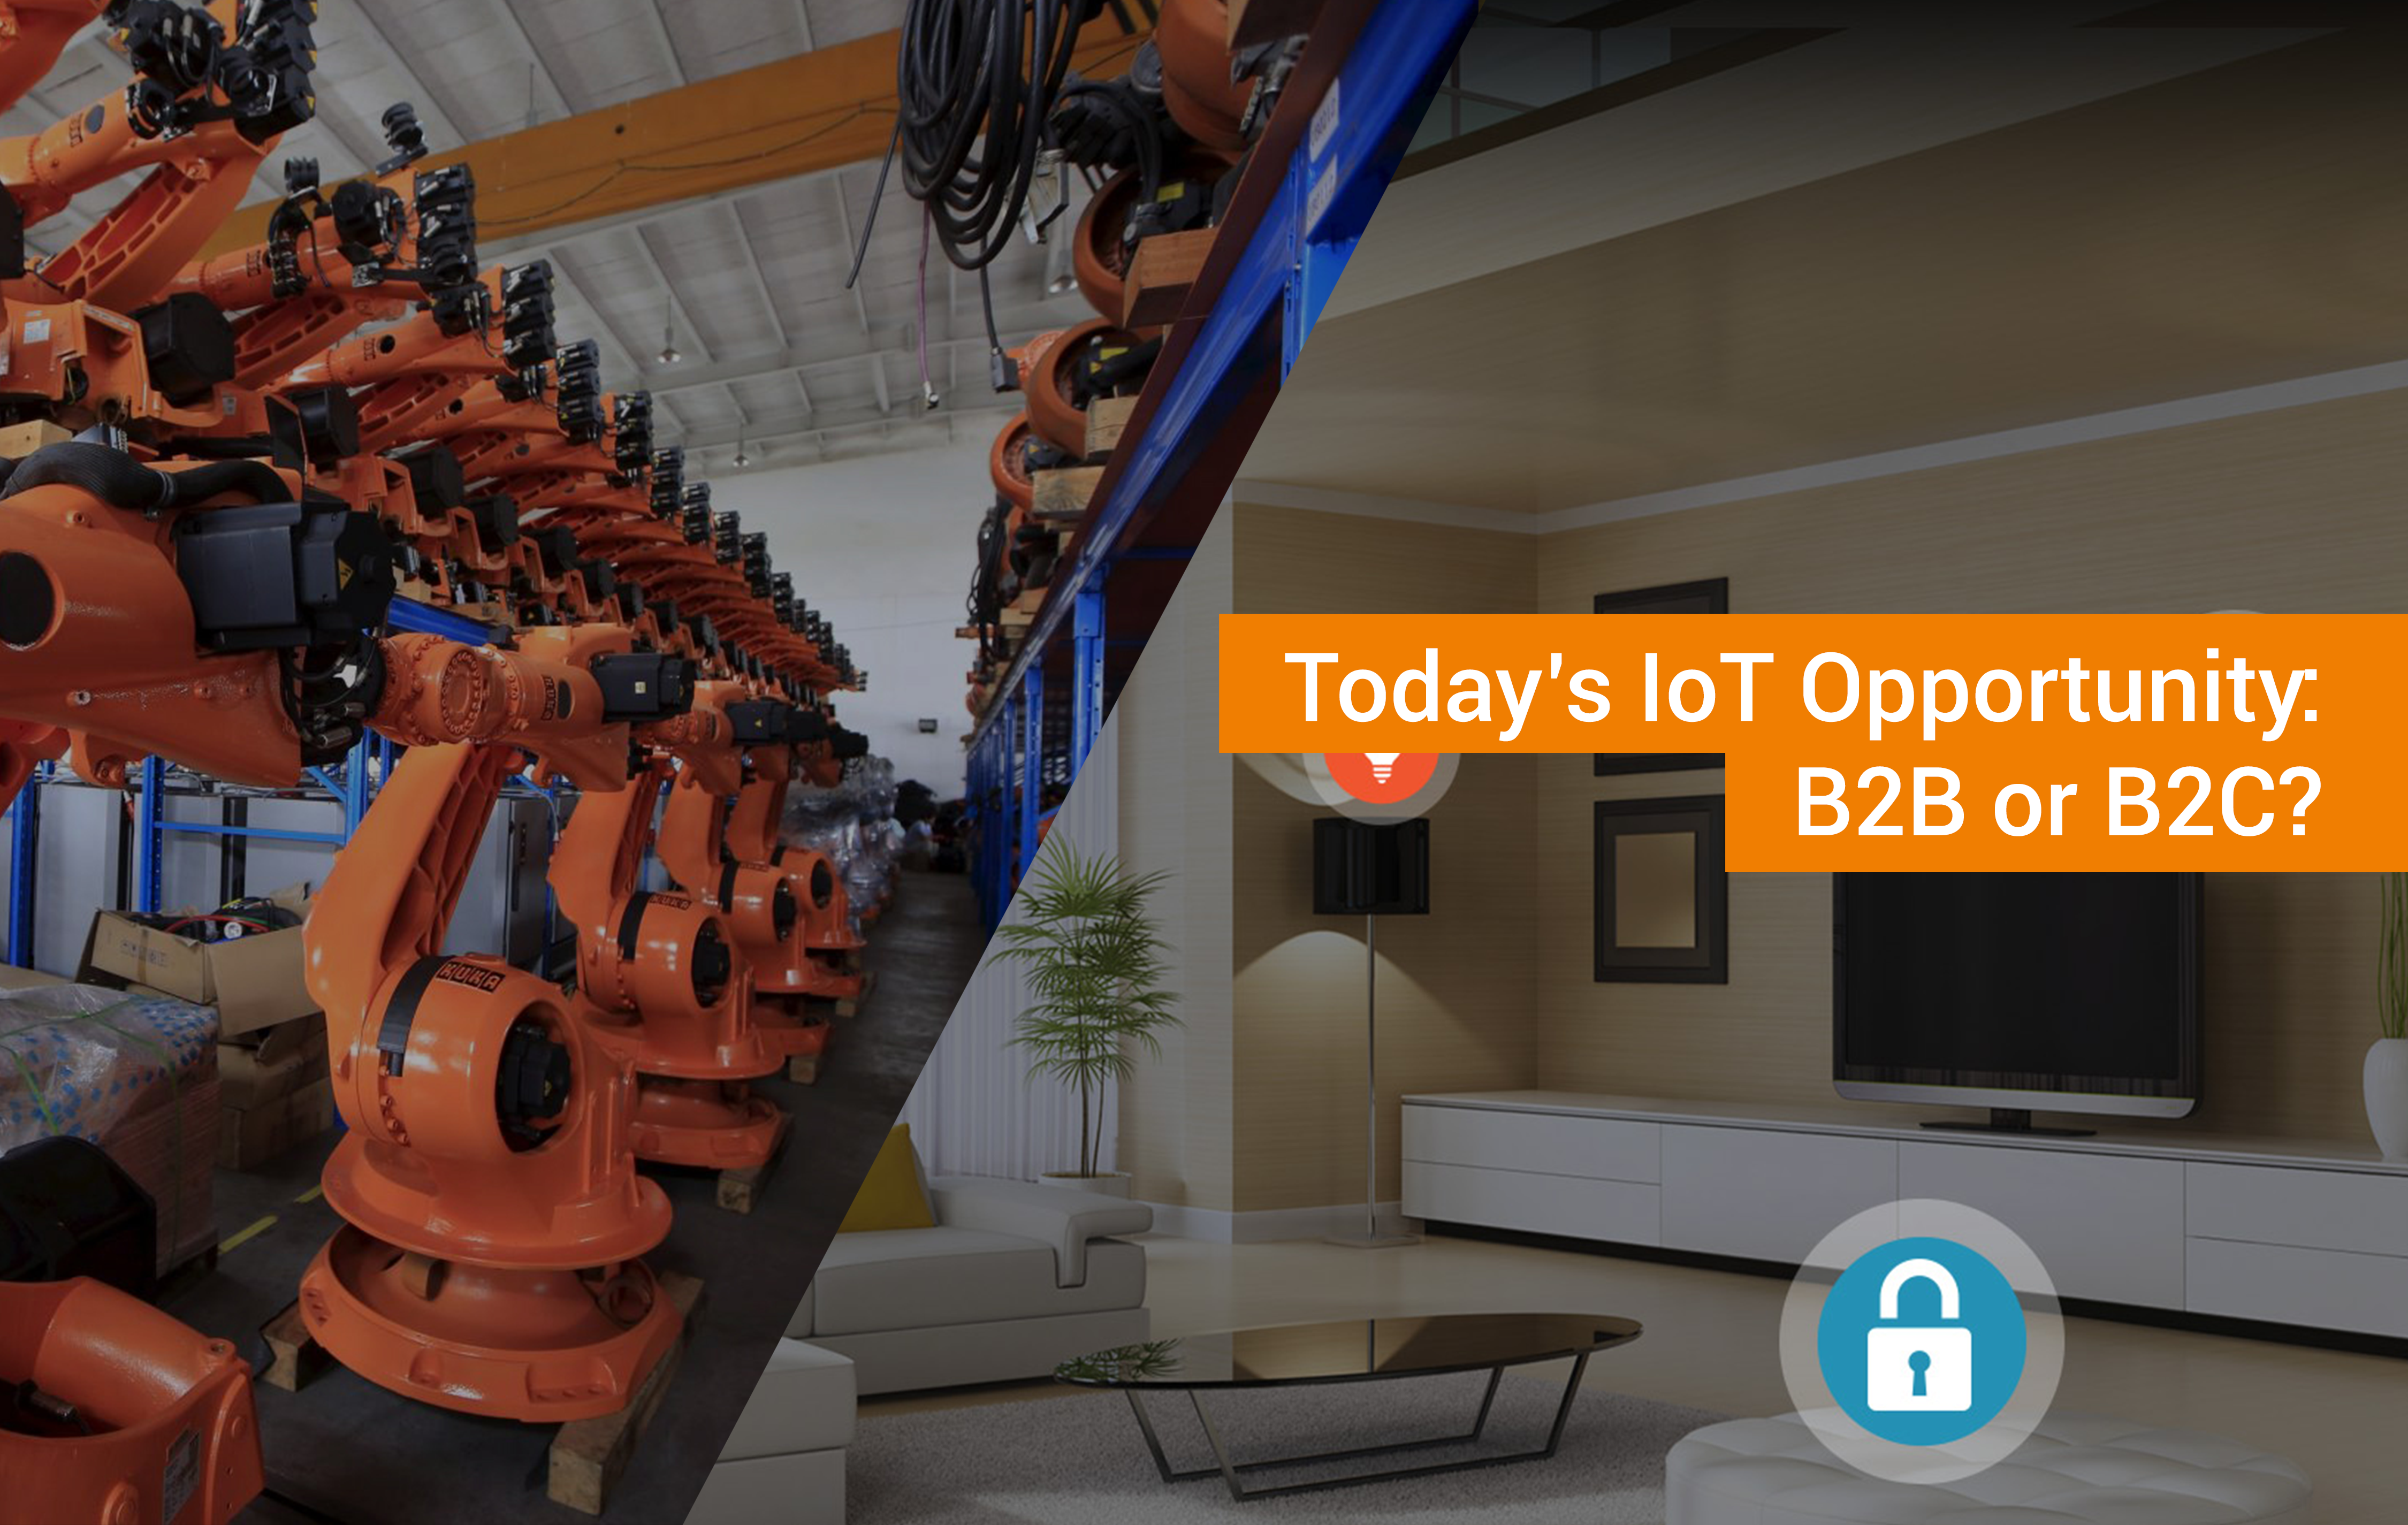 Today’s IoT Opportunity: B2B or B2C?